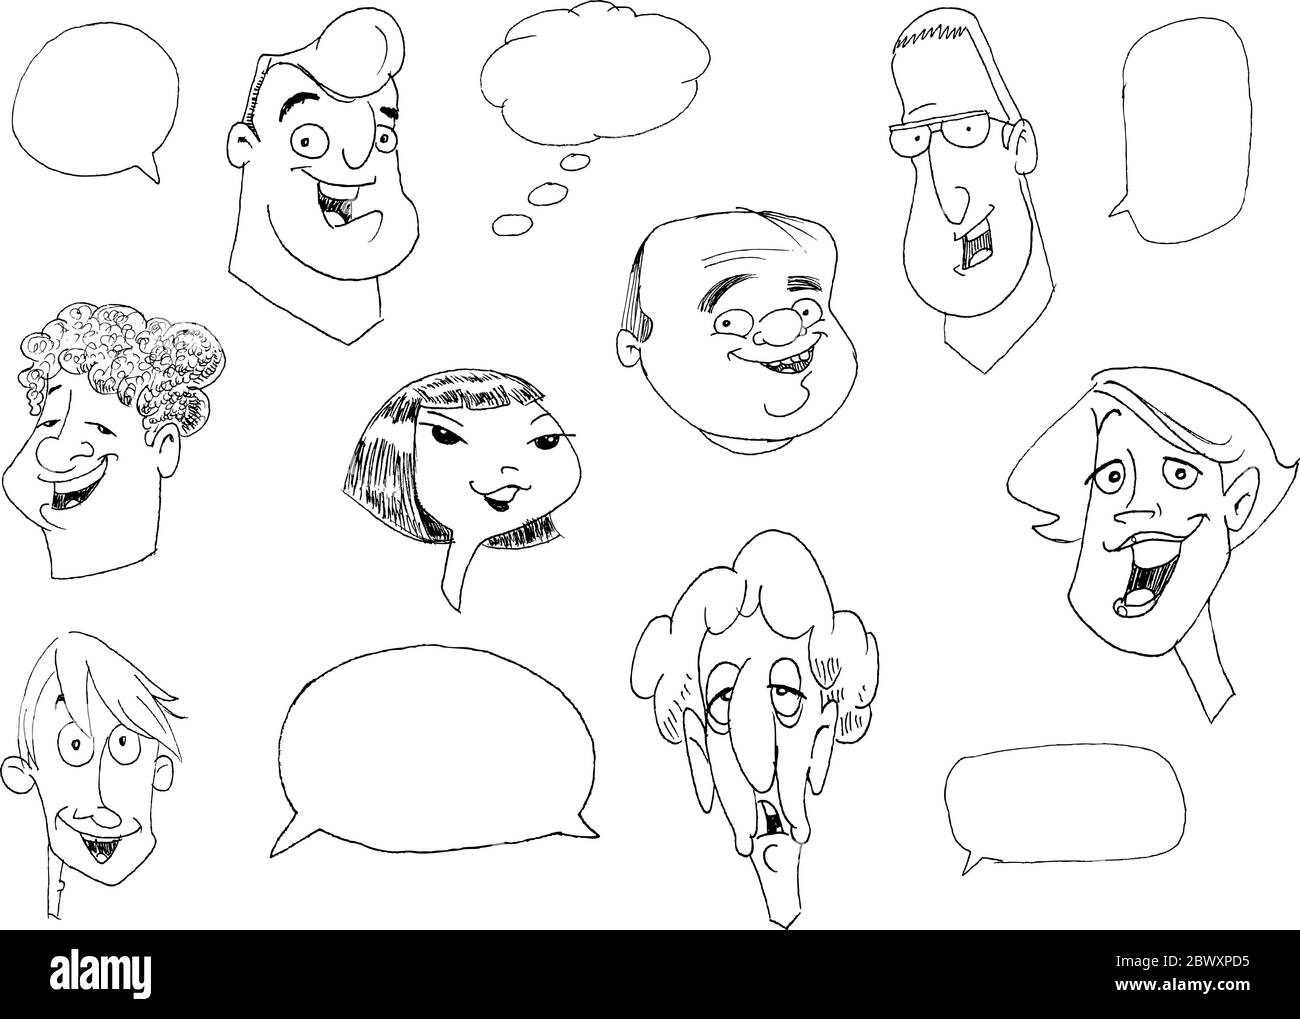 Doodle set of various people faces with speech bubbles Stock Vector